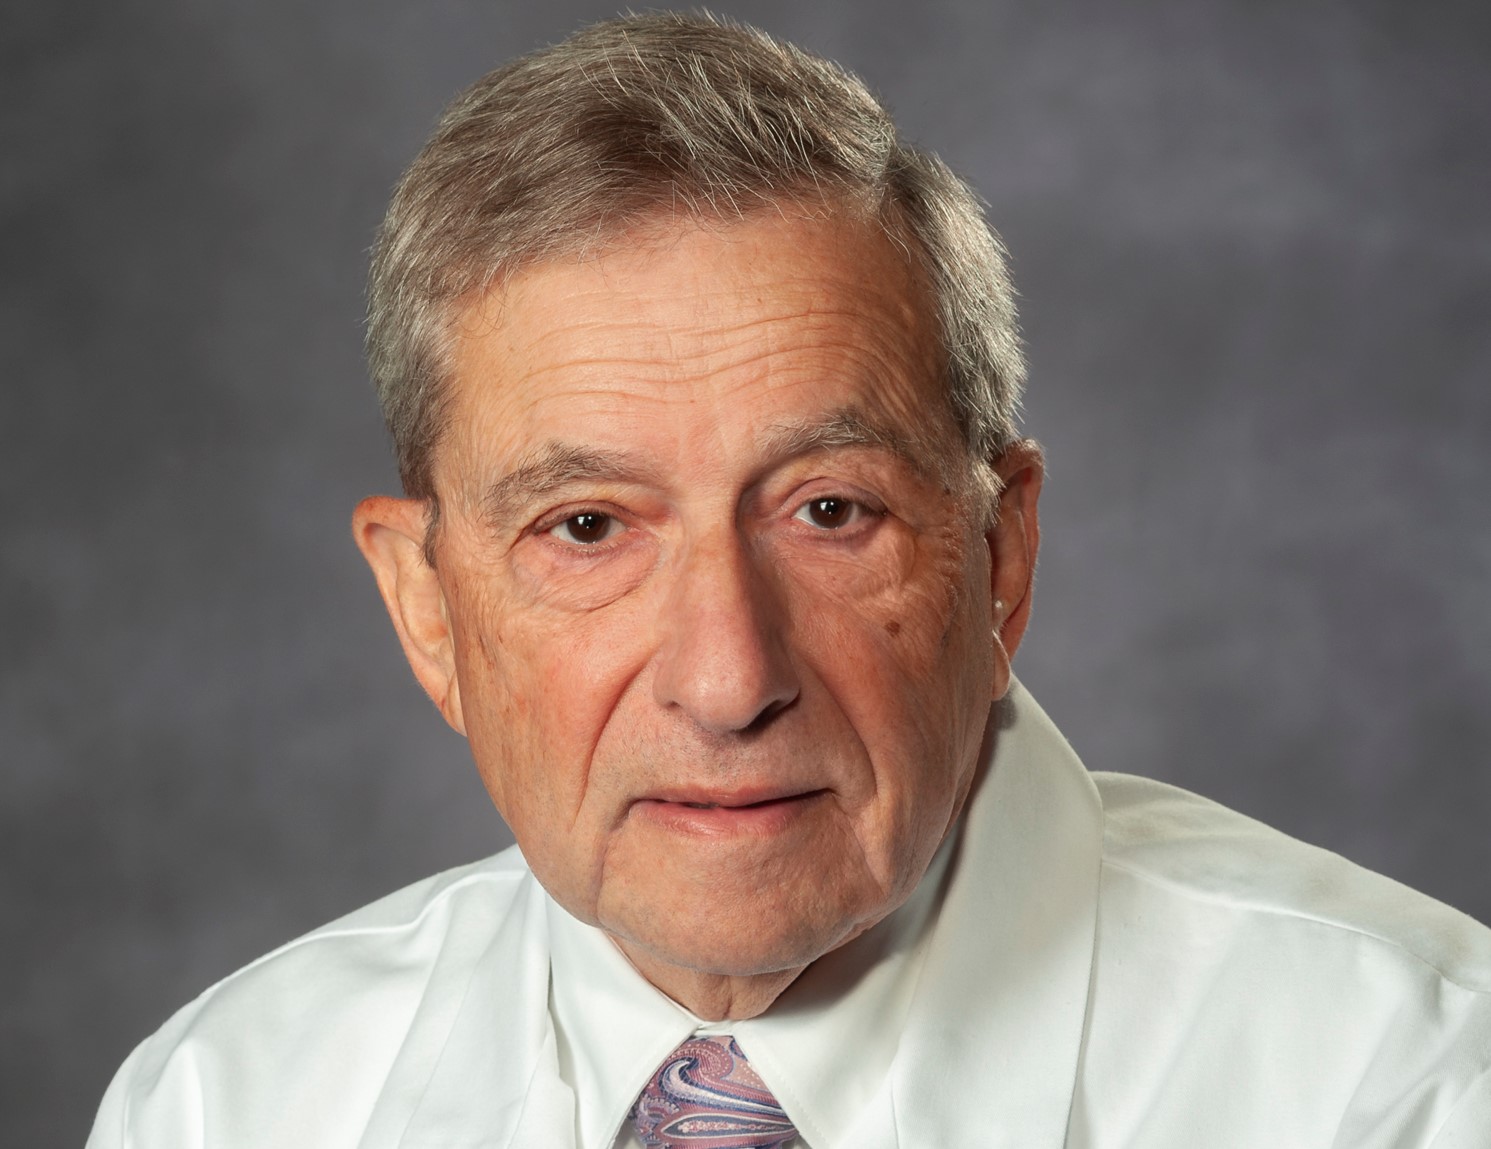  Joel Silverman, M.D., professor in the Department of Psychiatry; U.S. Army, 1973–1975 as chief of psychiatry in Japan. “I also covered the ER on rotation with the other physicians, which both used and strengthened my general medical skills.” 